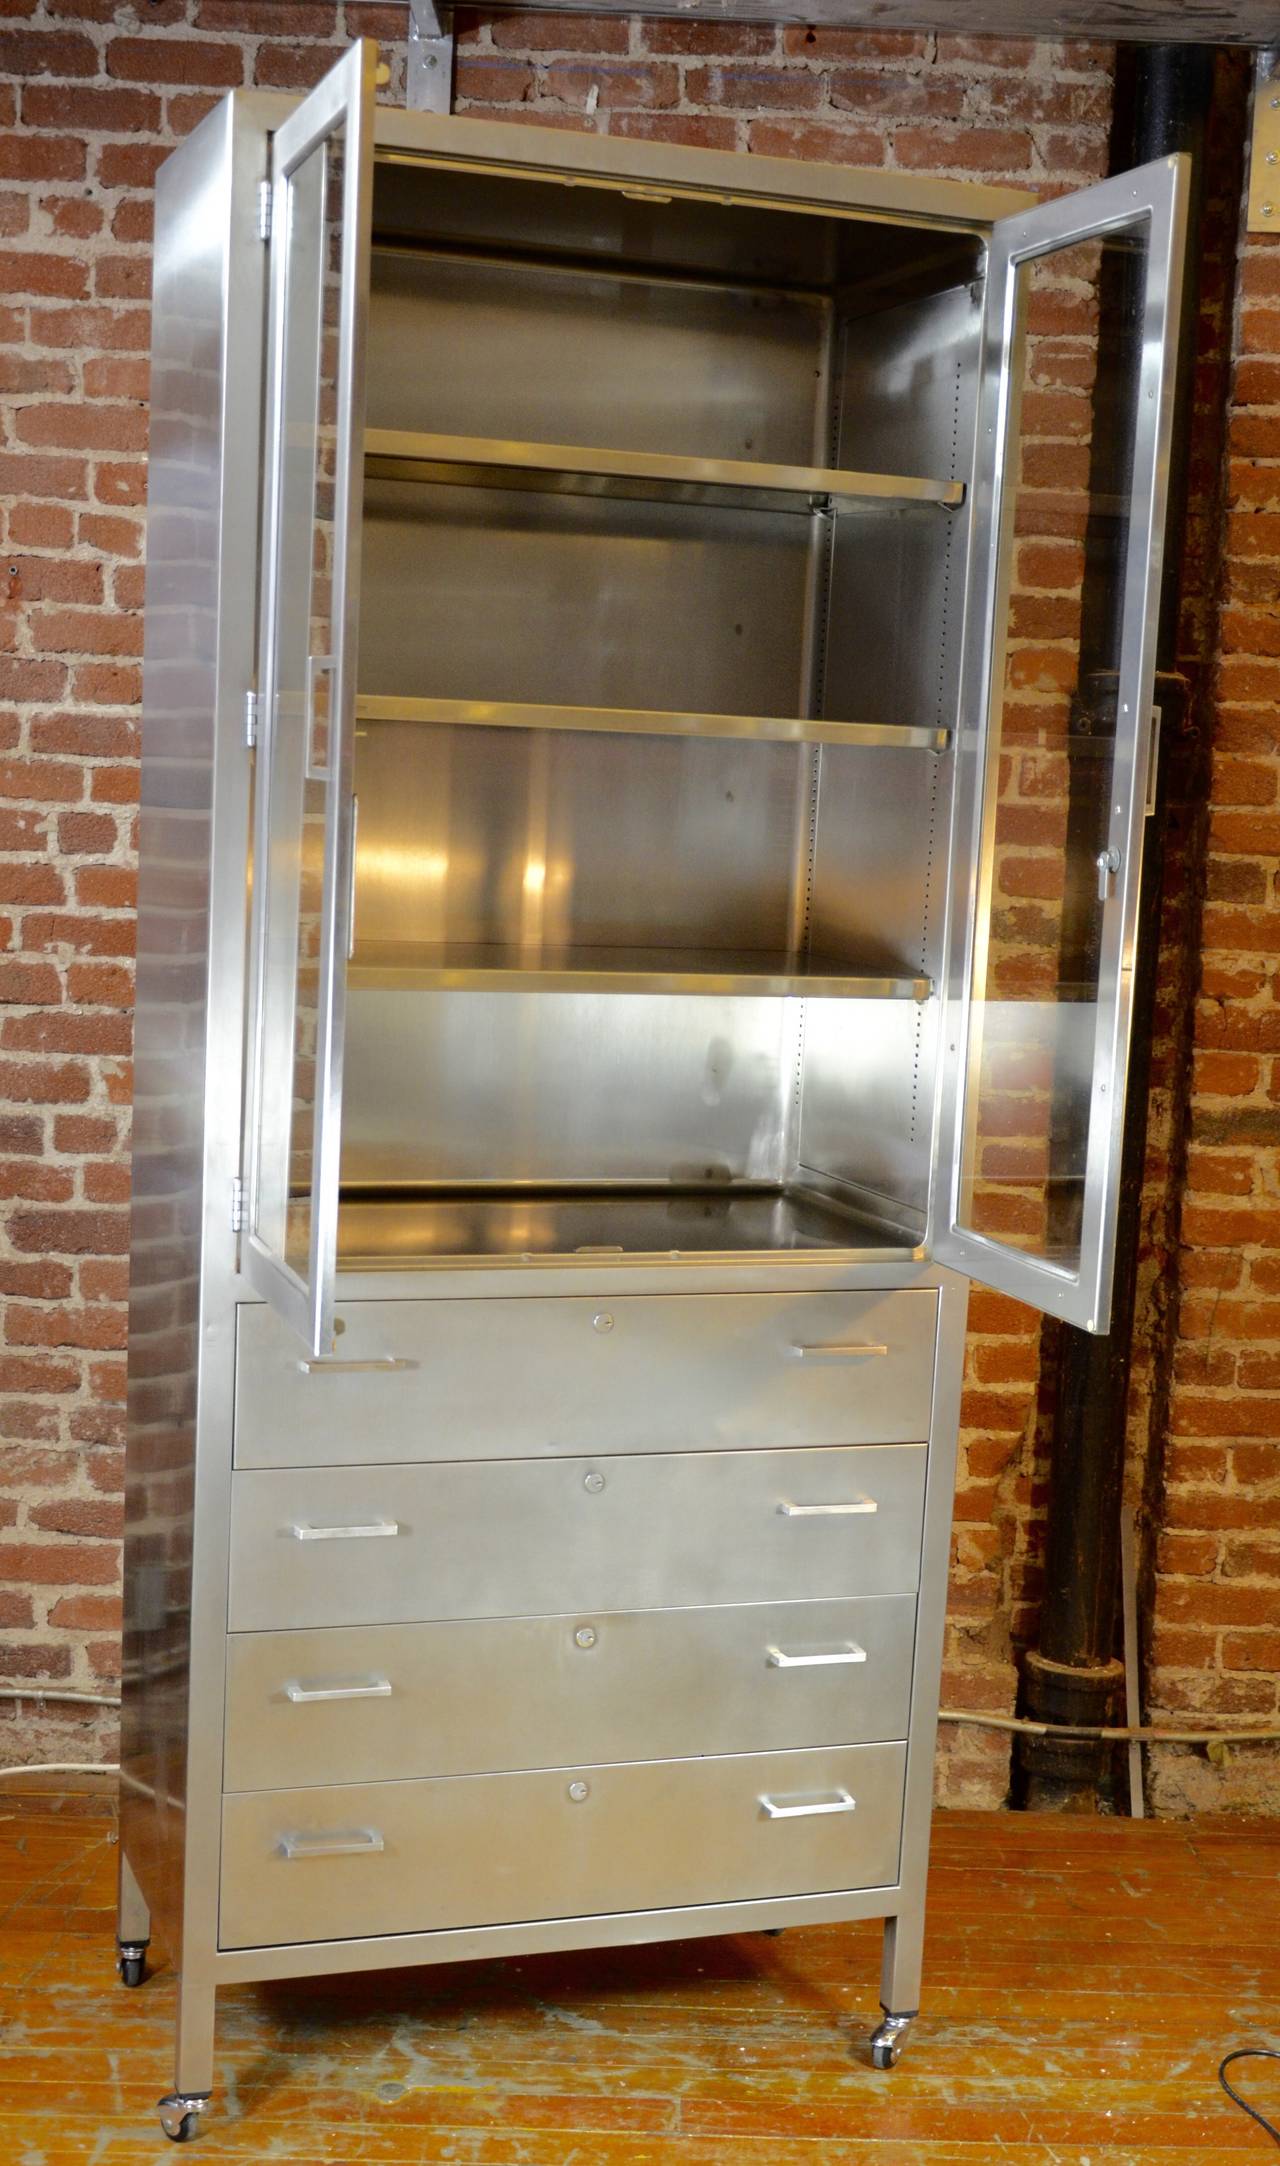 Classic Stainless Steel Lockdown Cabinet In Excellent Condition For Sale In Oakland, CA